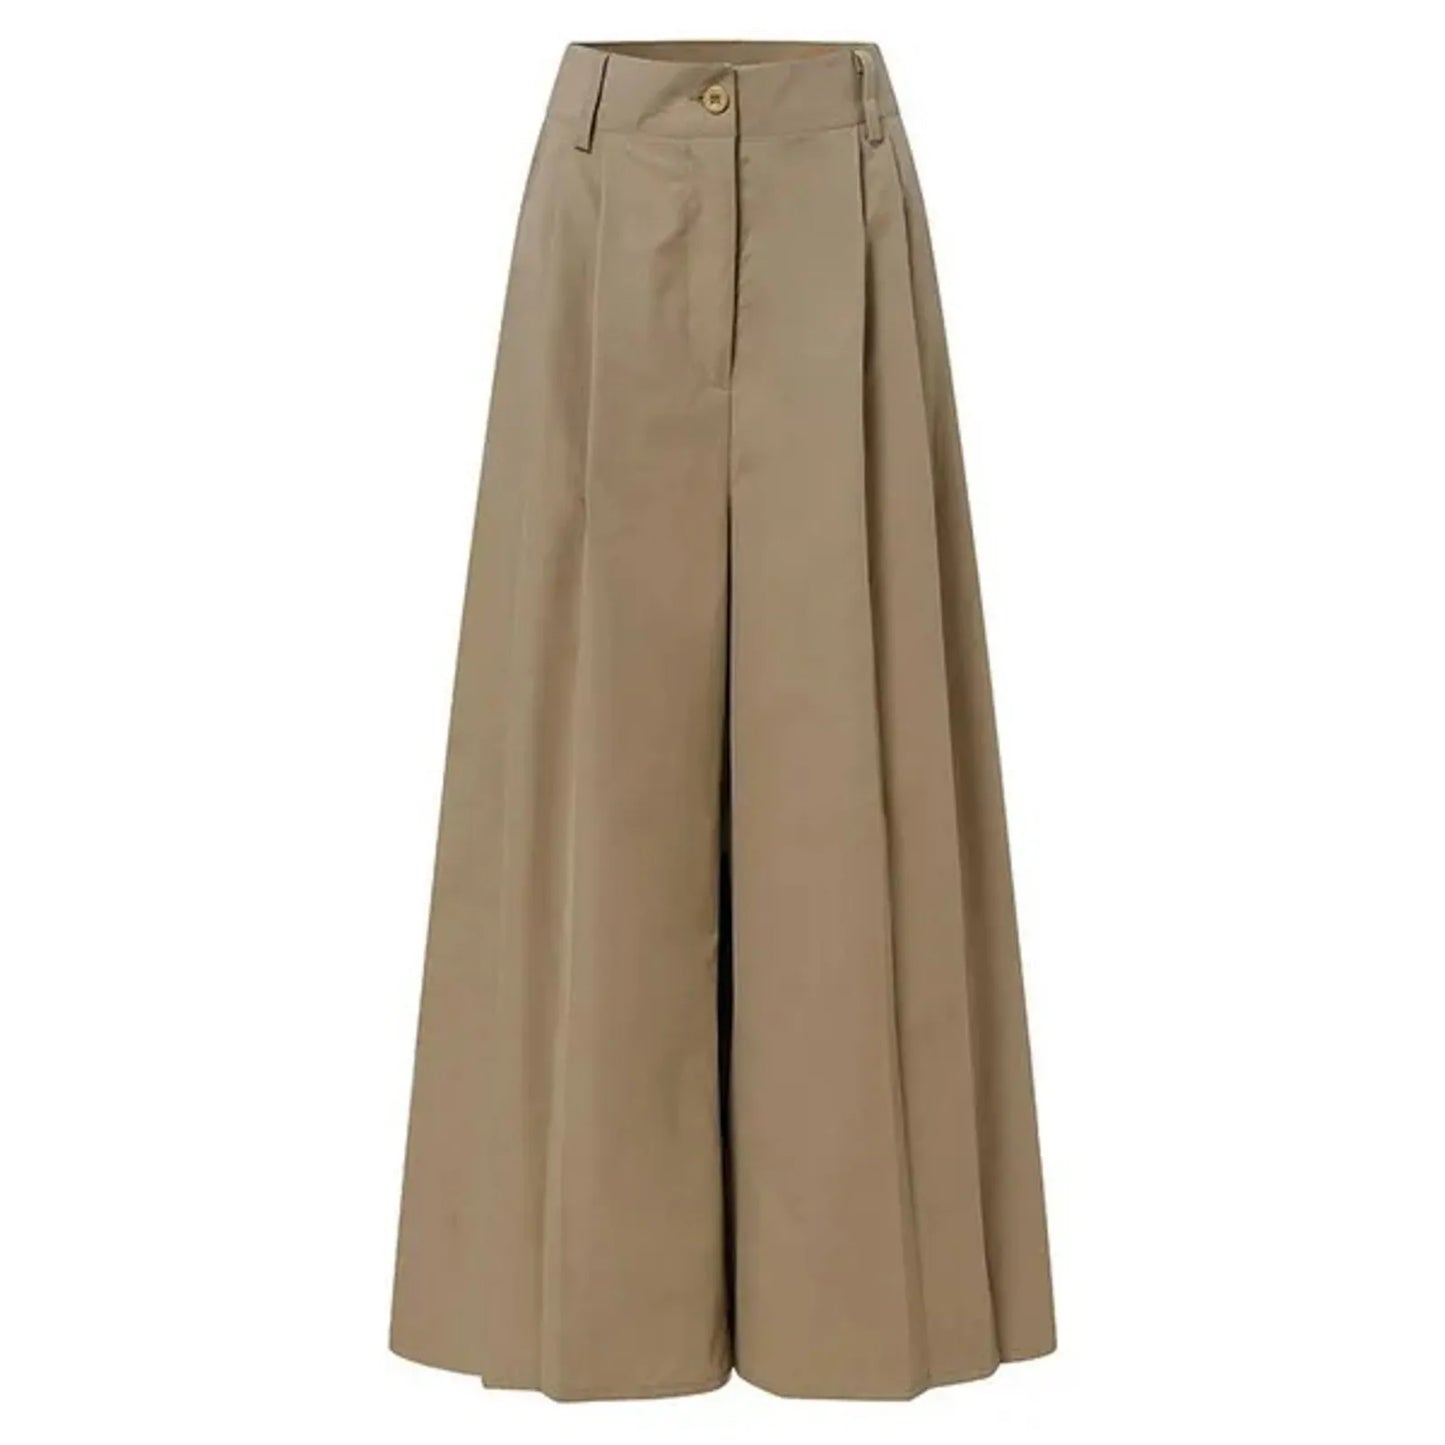 Flared Palazzo Pants For Women Cropped Cotton Linen Comfy Baggy Pants With Pockets Fashion Elegant Party High Waist Trousers